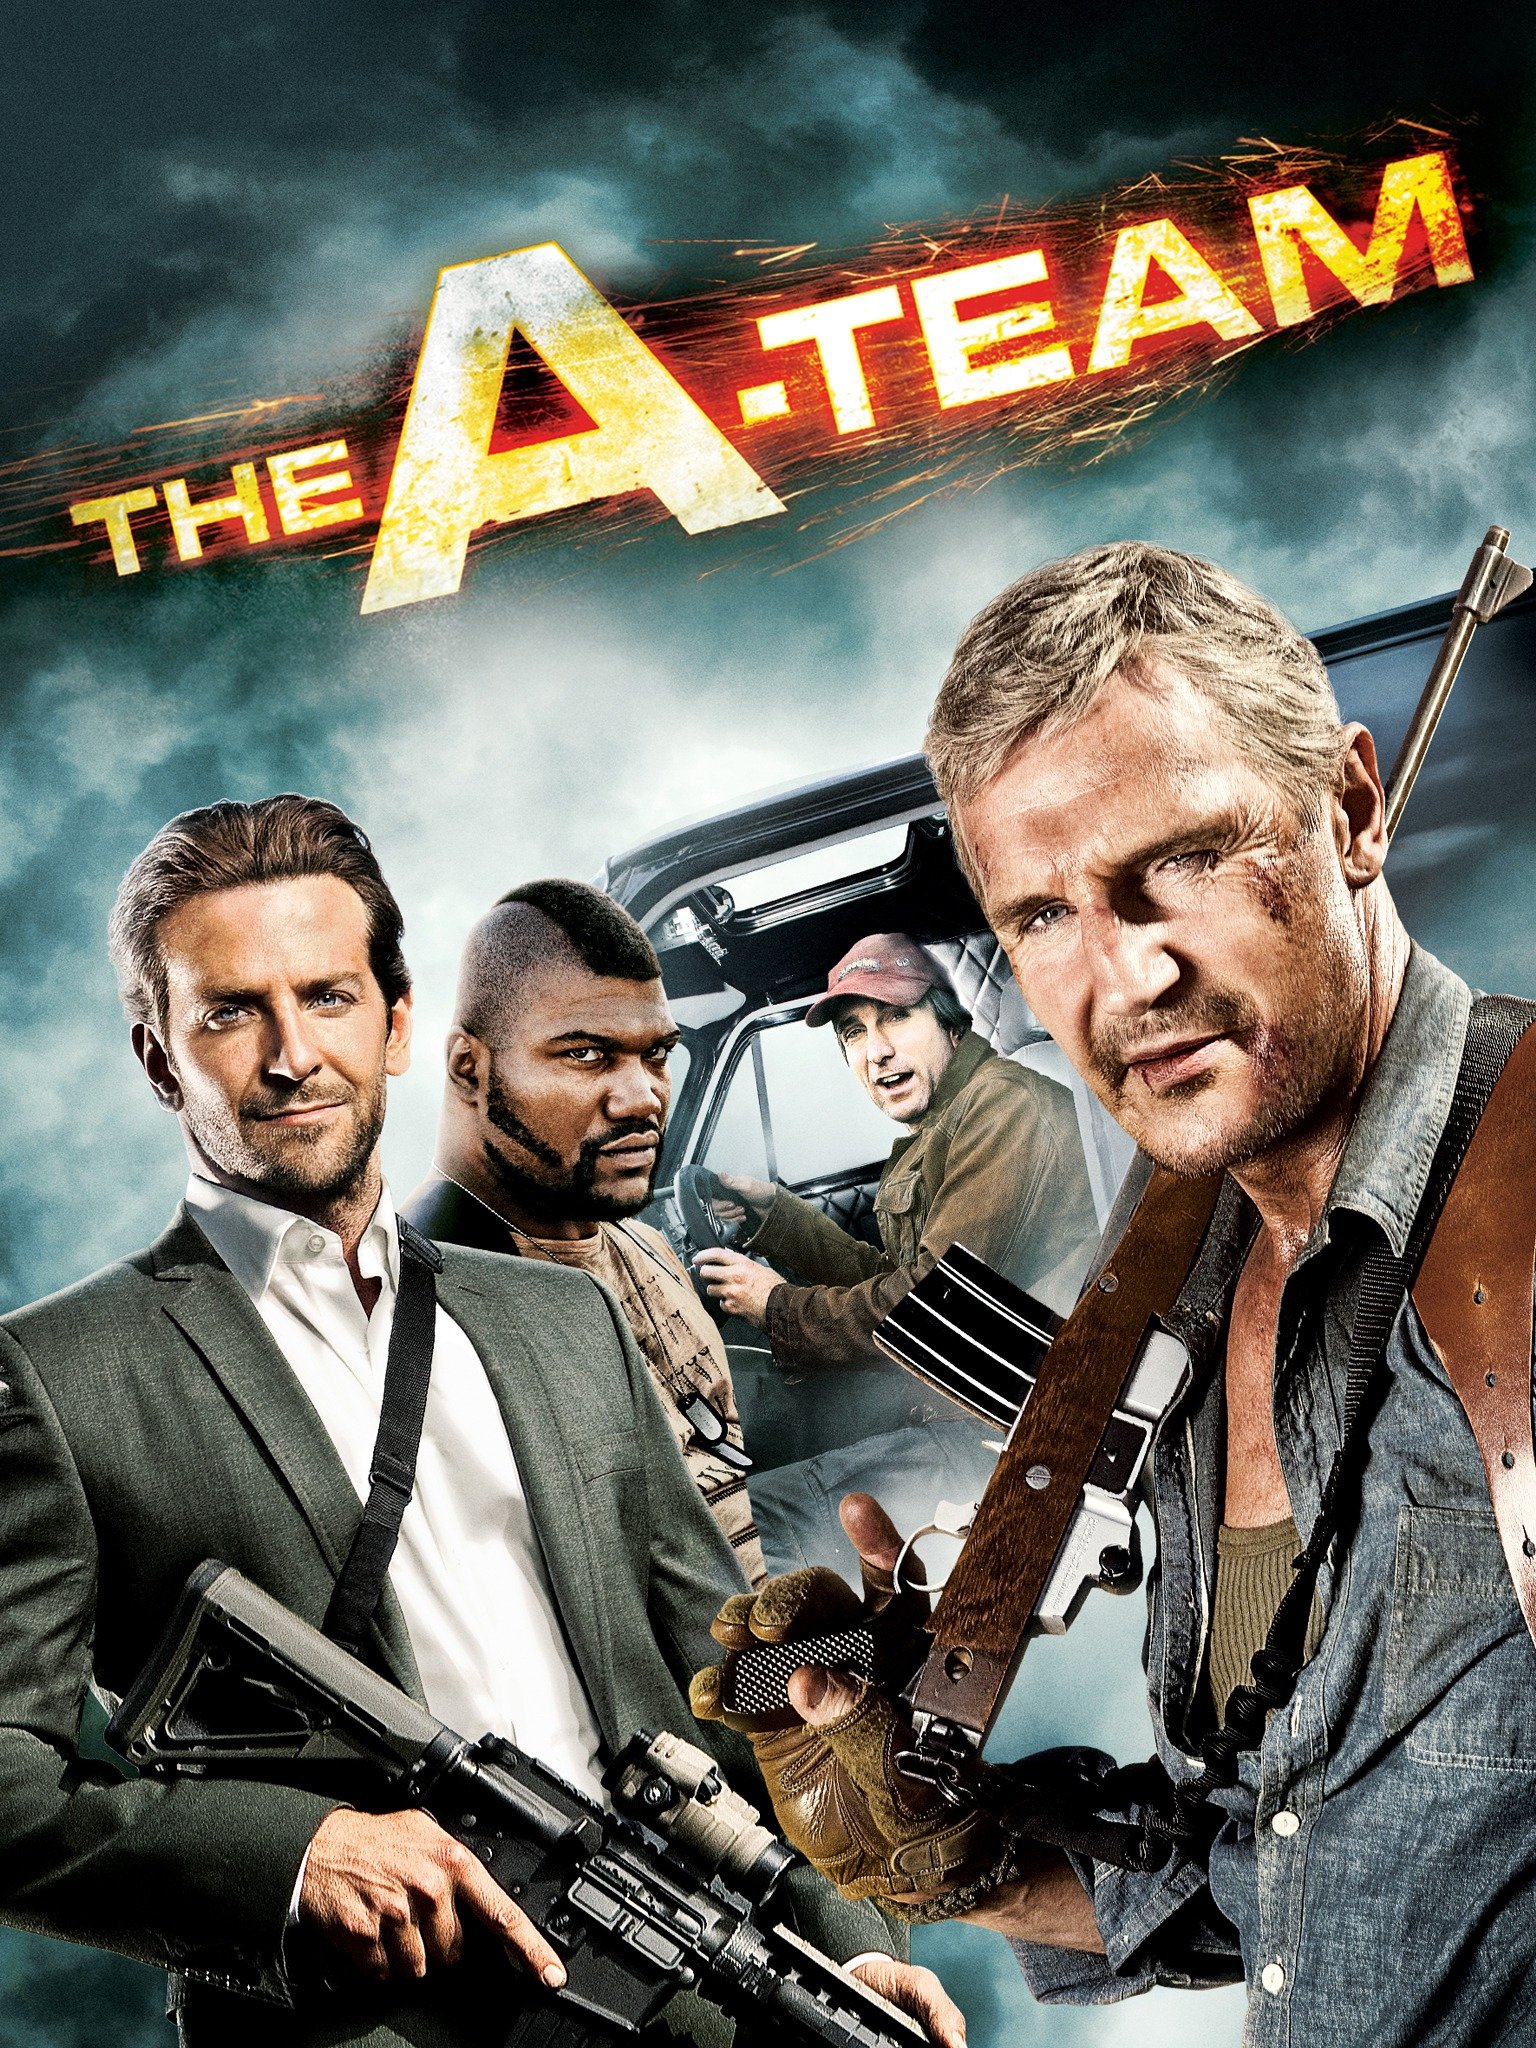 The A Team 2010 Full Movie Online In Hd Quality